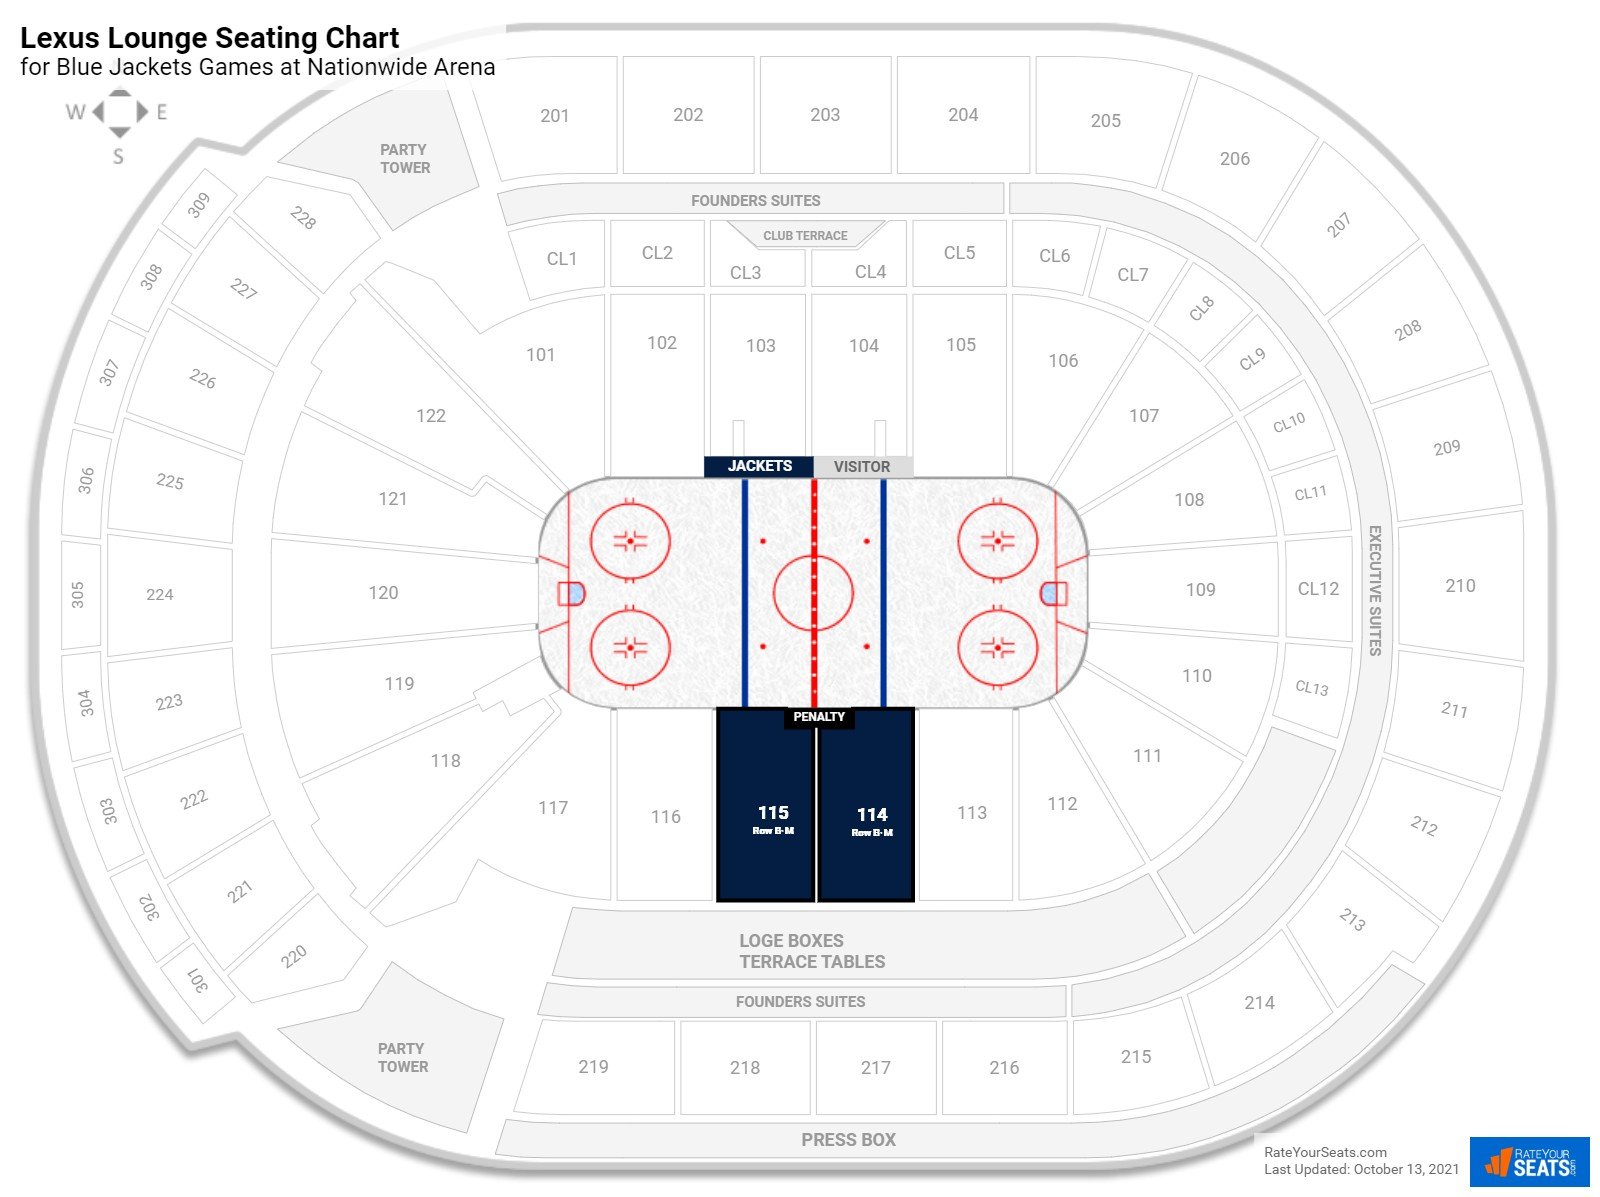 Blue Jackets Lexus Lounge Seating Chart at Nationwide Arena